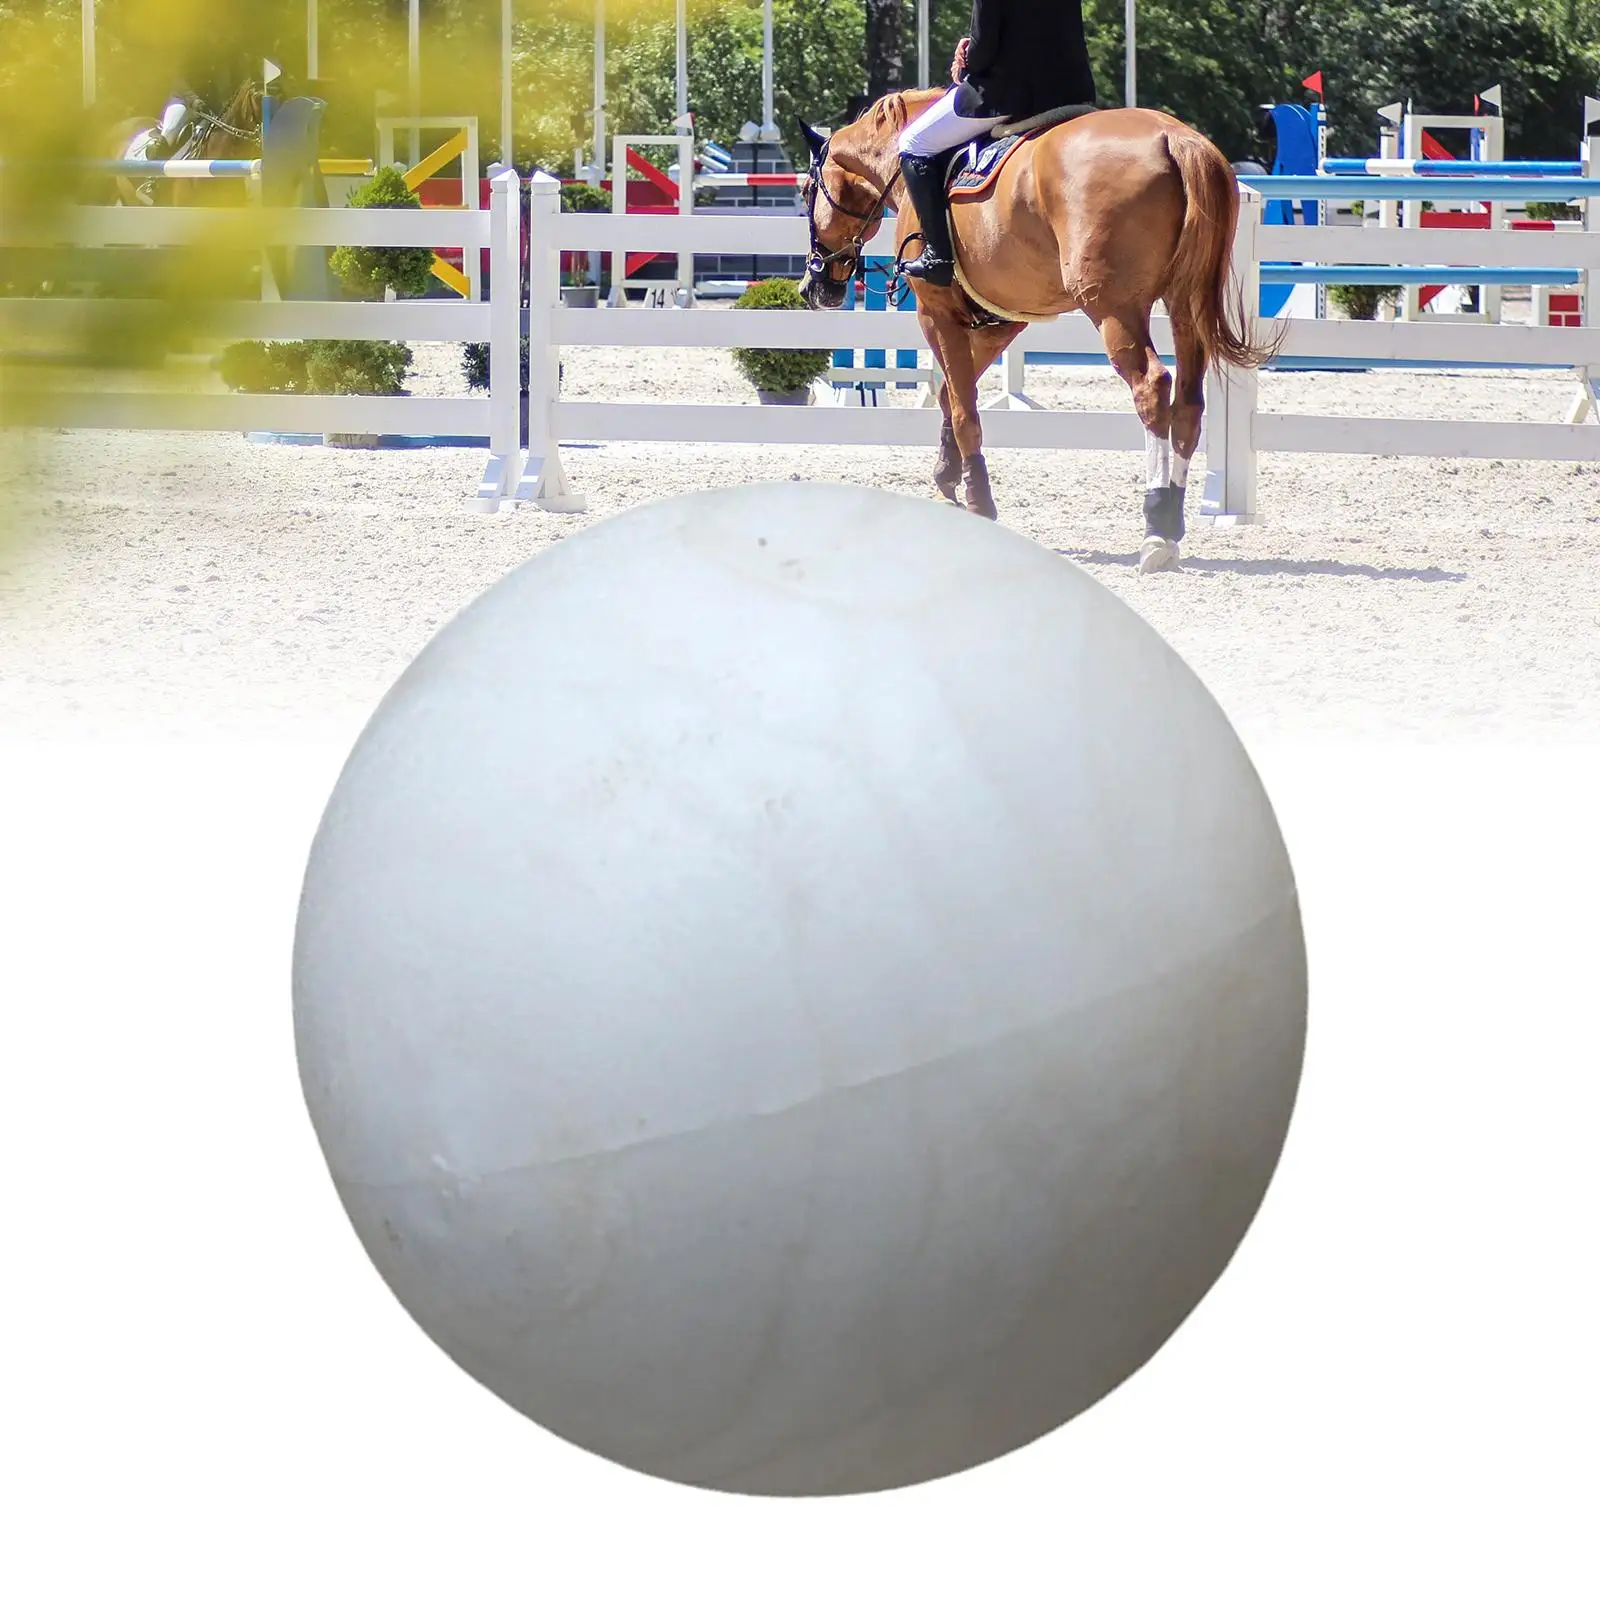 Toss Jolly Play Ball PC Wear Resistant Horse Play Ball for Sheep Horse Play Tugging Juggling